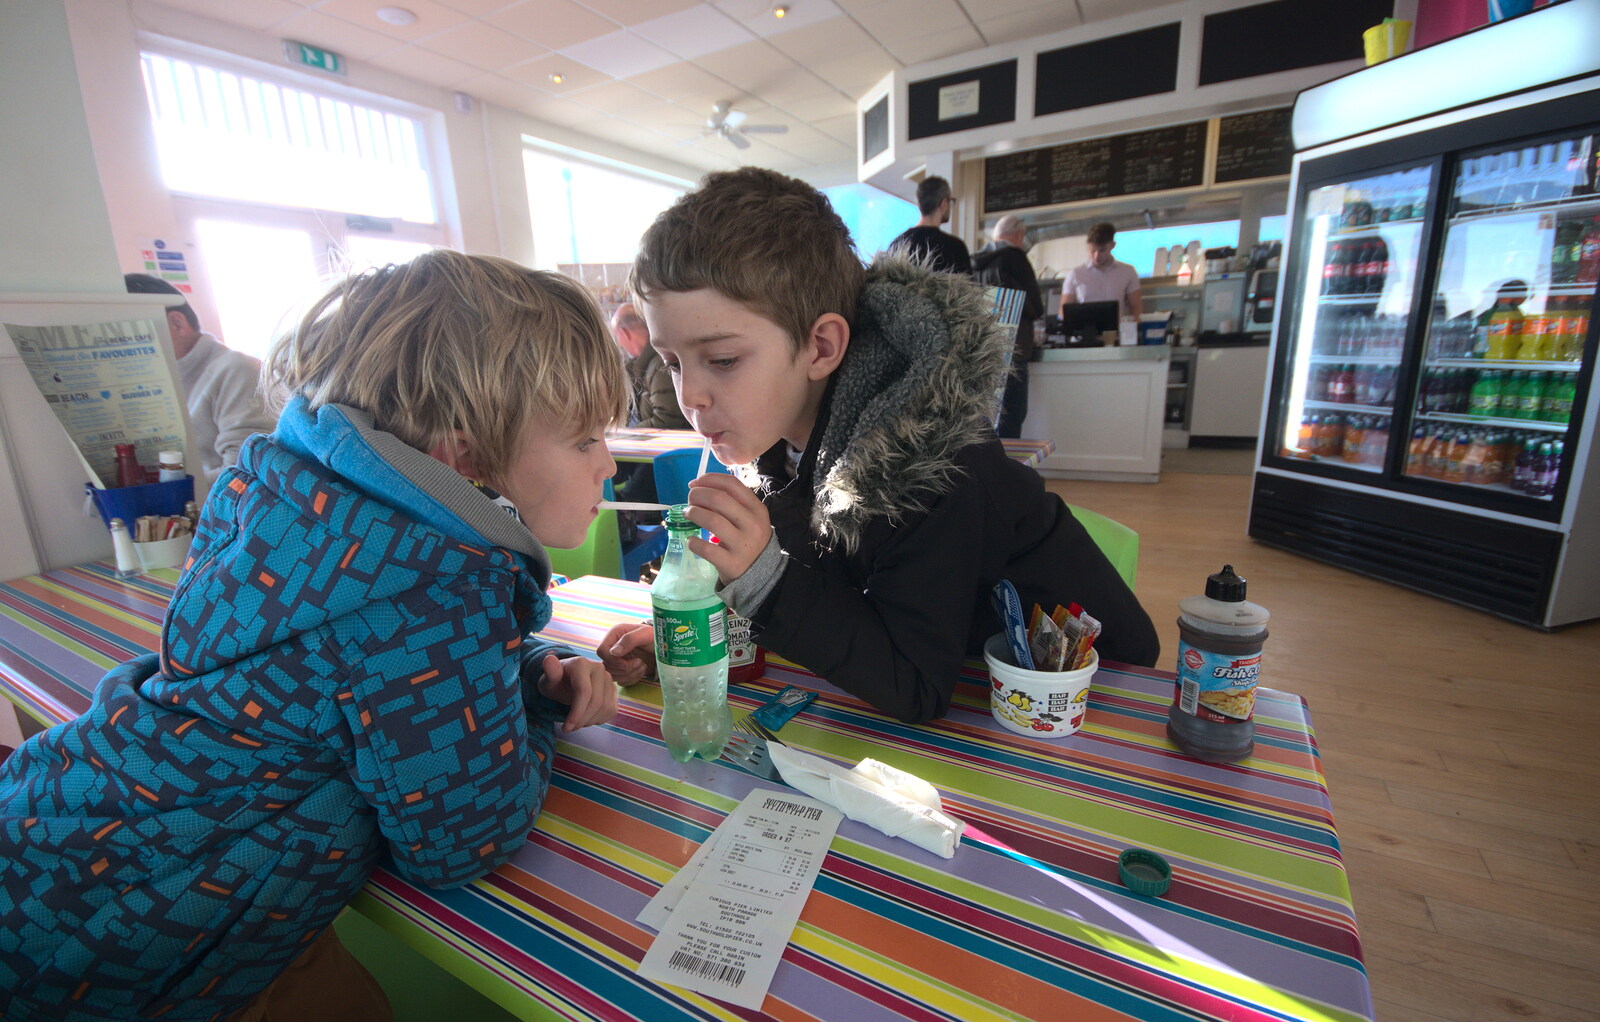 The boys share a Diet Sprite in the café from Sunset at the Beach, Southwold, Suffolk - 18th November 2018